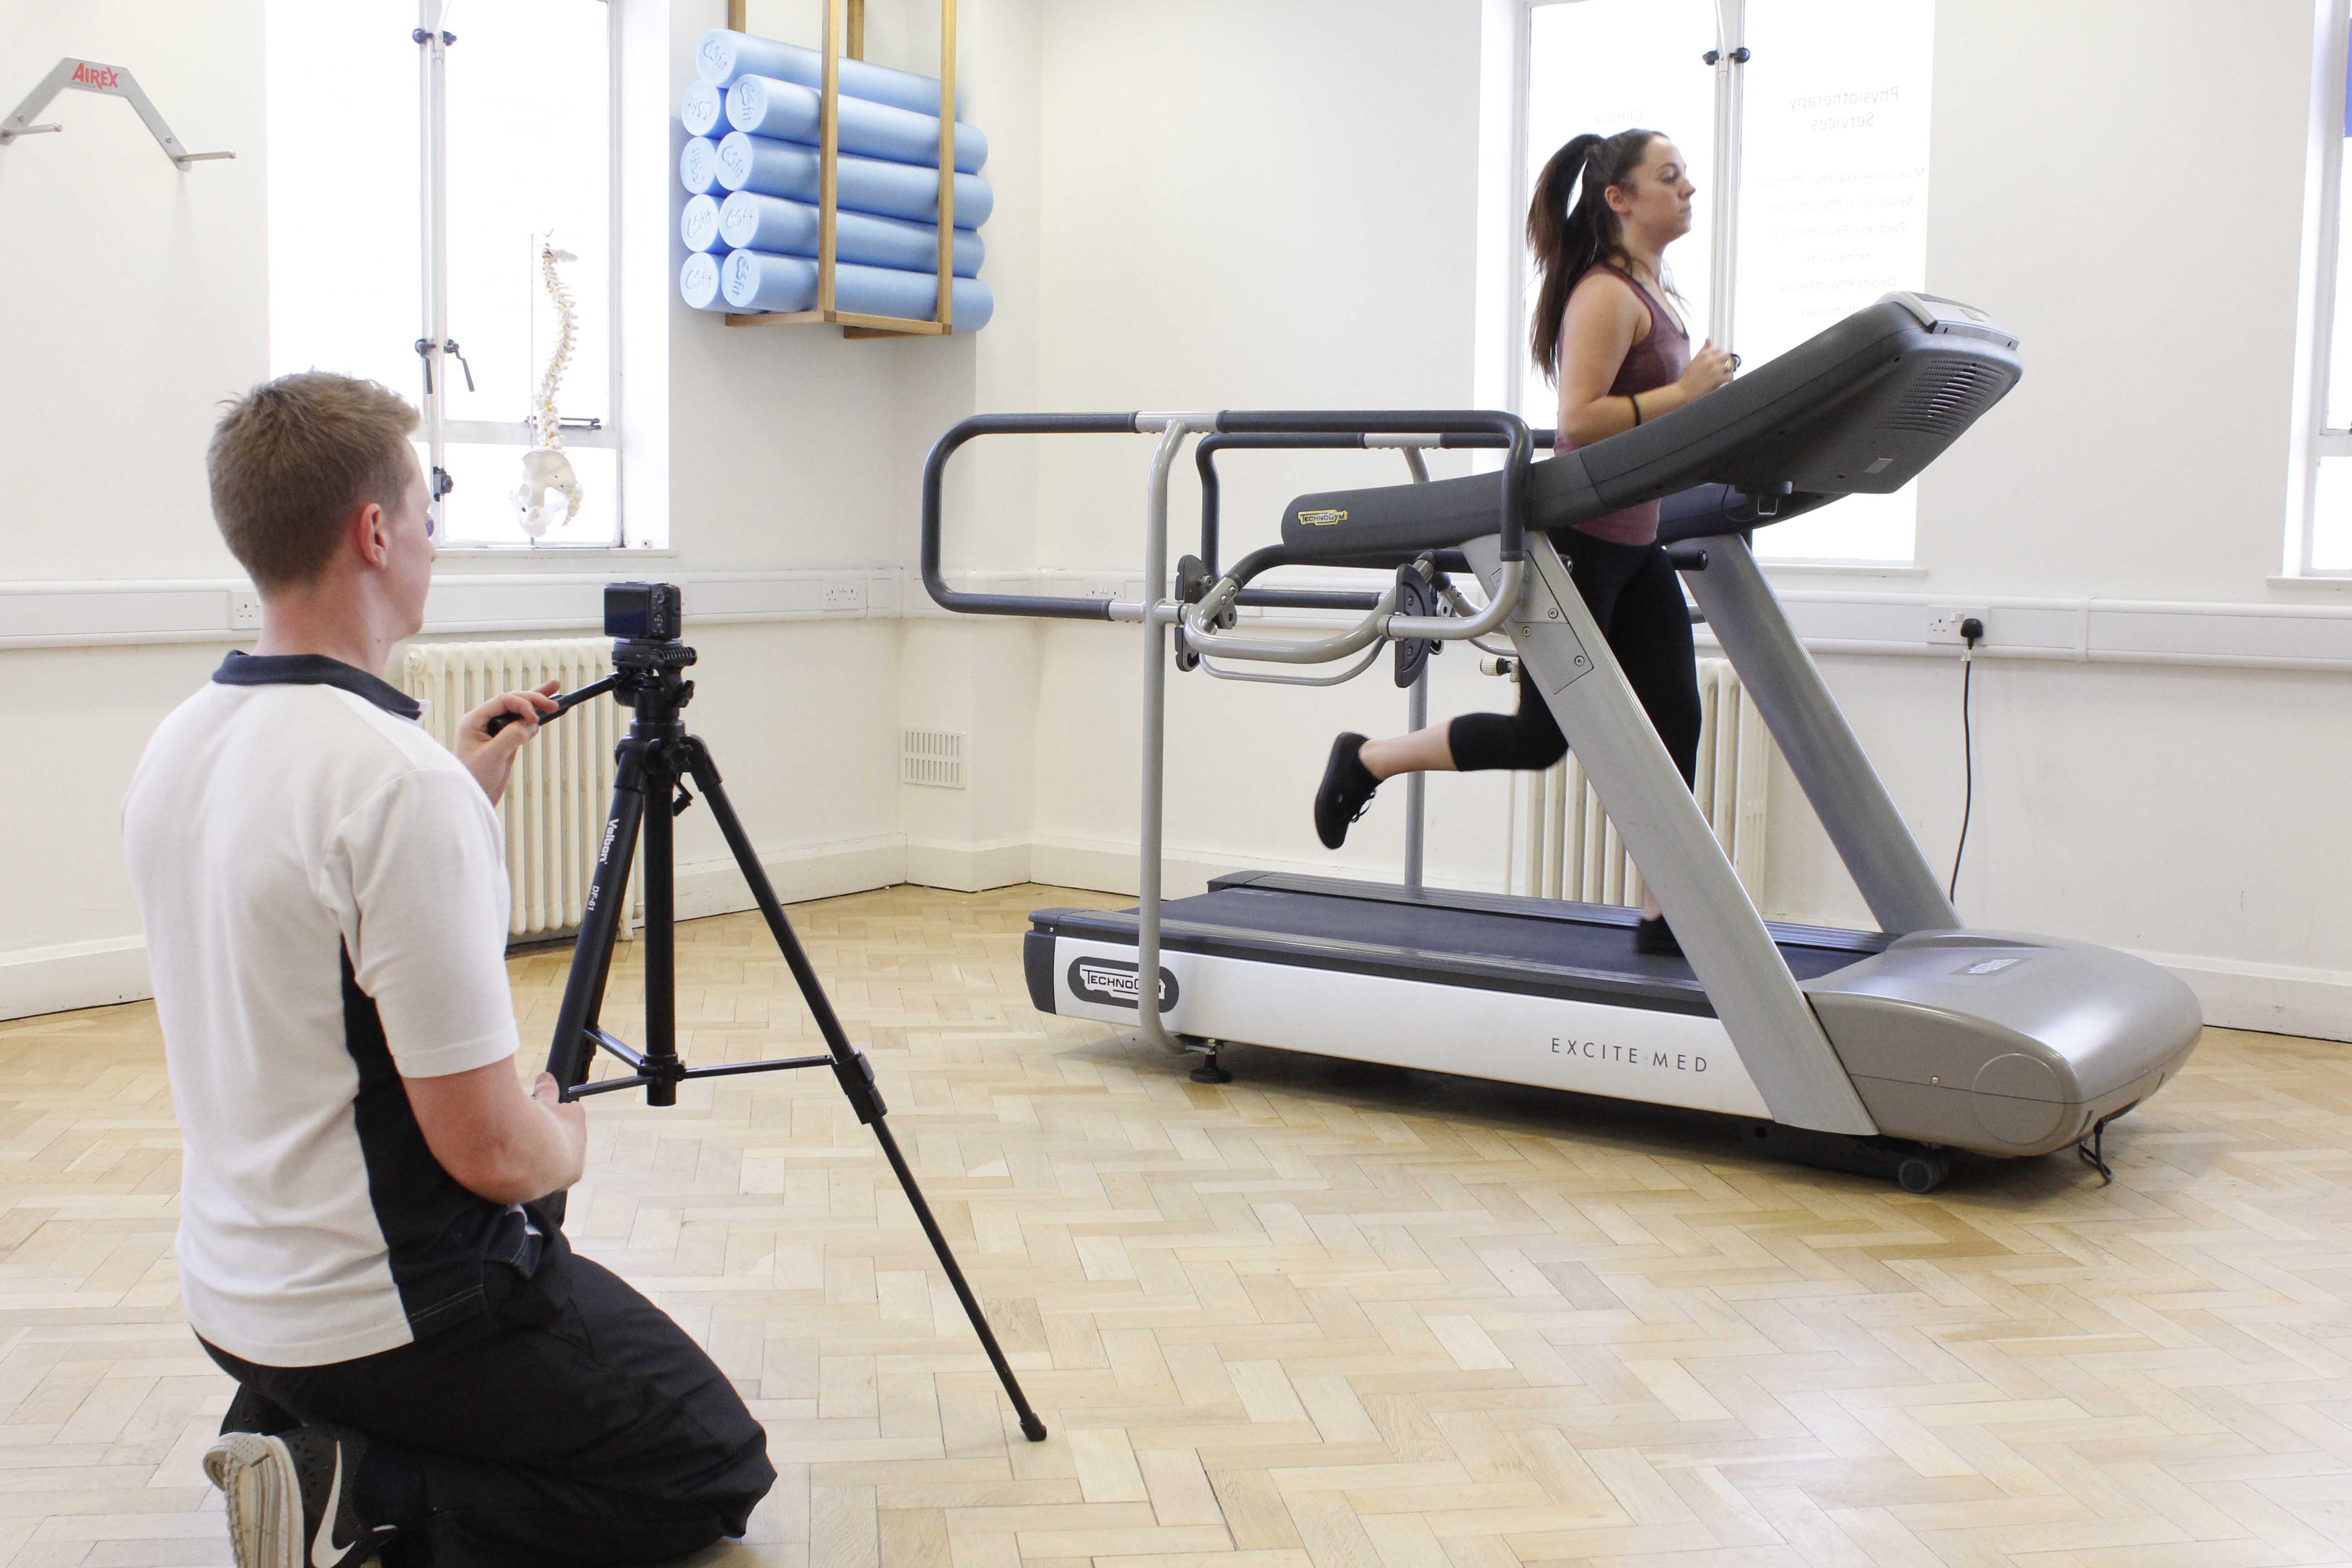 Biomechanical assessment for runners using videography 
